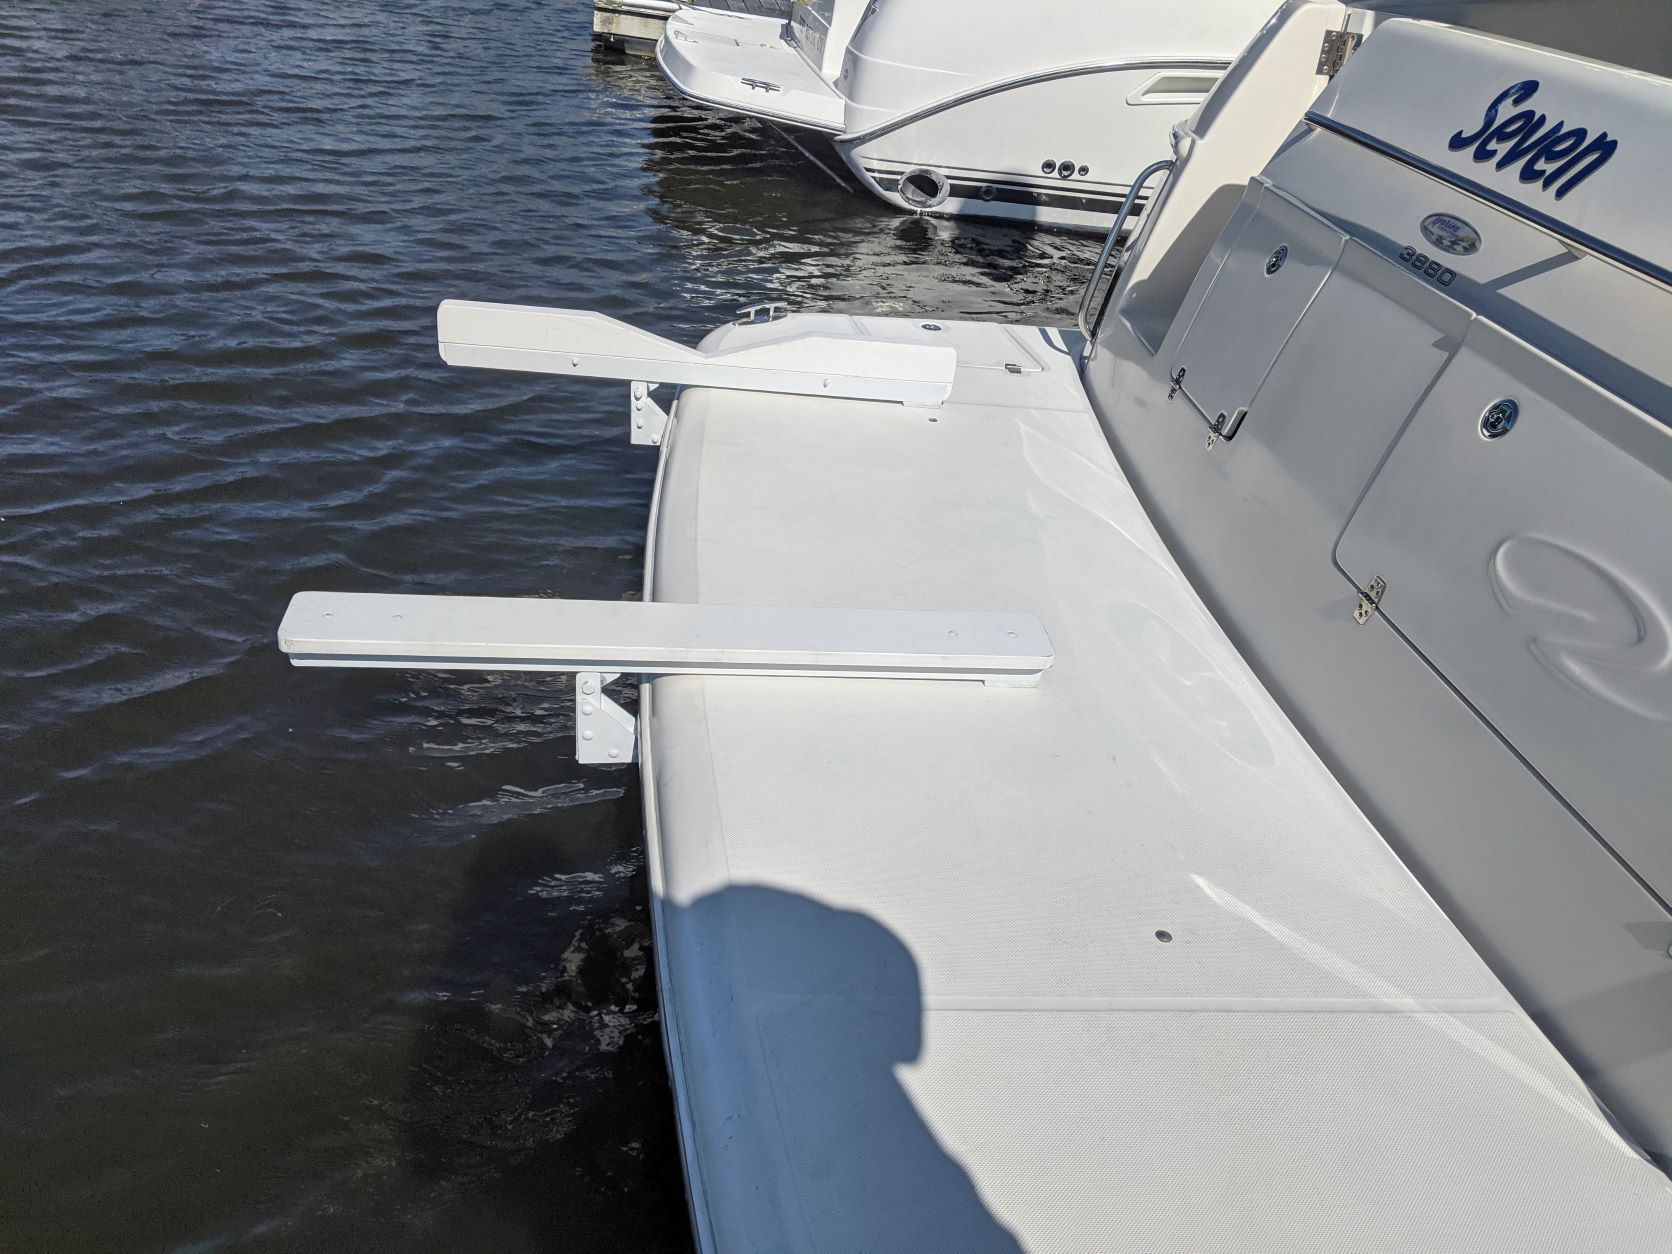 Dinghy davit systems and dinghy davits for inflatable boat davit systems.